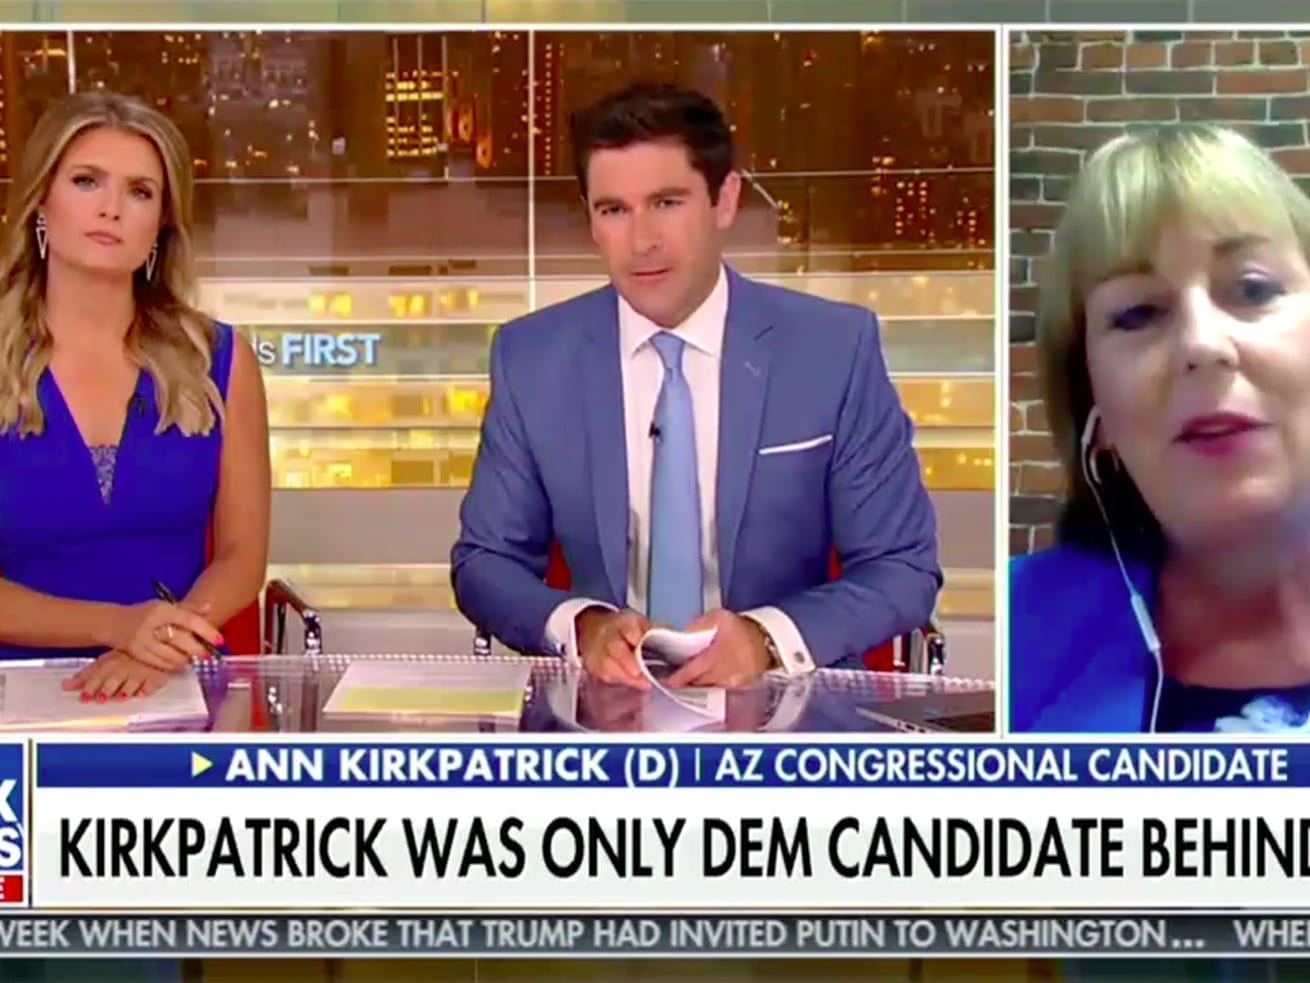 “I’m actually here to speak directly to Donald Trump”: Fox was duped by an anti-ICE Democrat